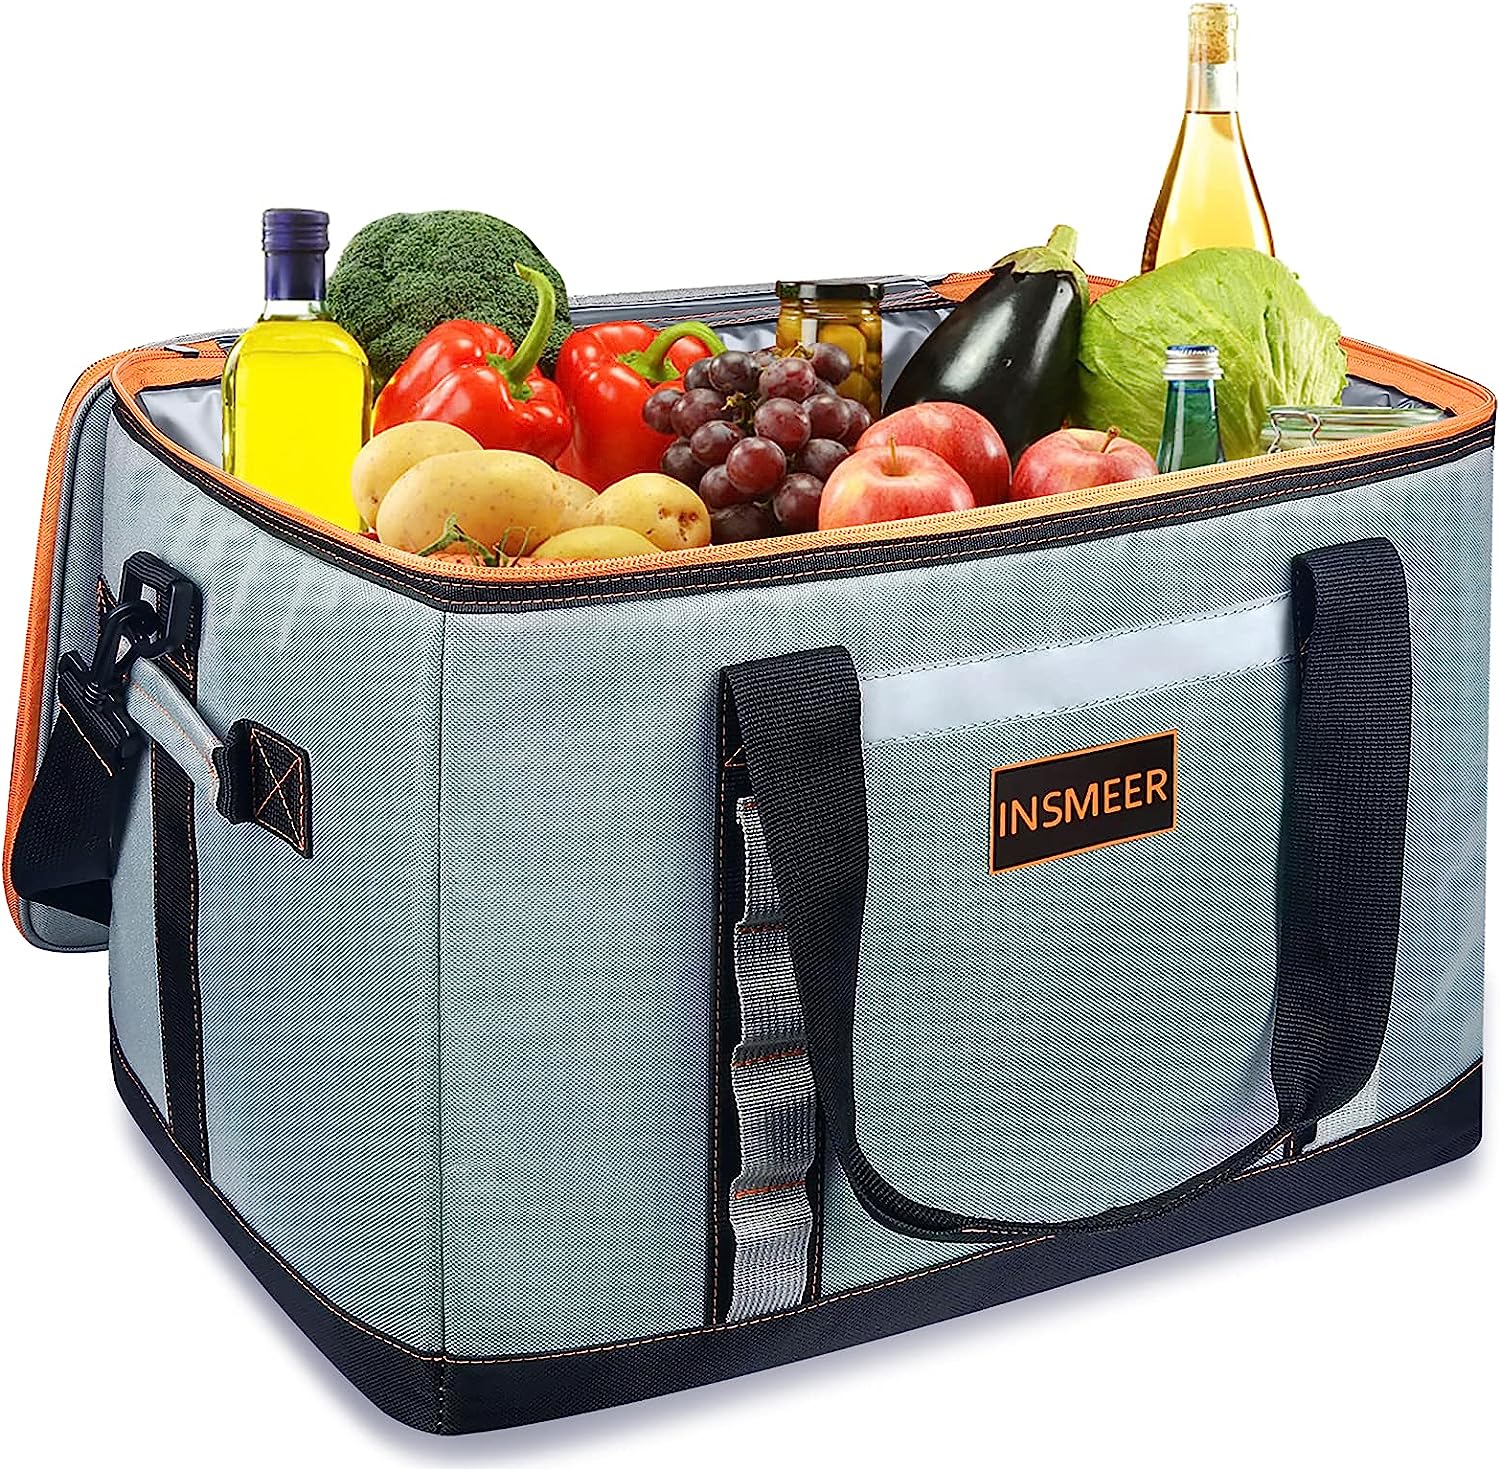 INSMEER Insulated Cooler Bag 65Cans/32 Cans Large [...]